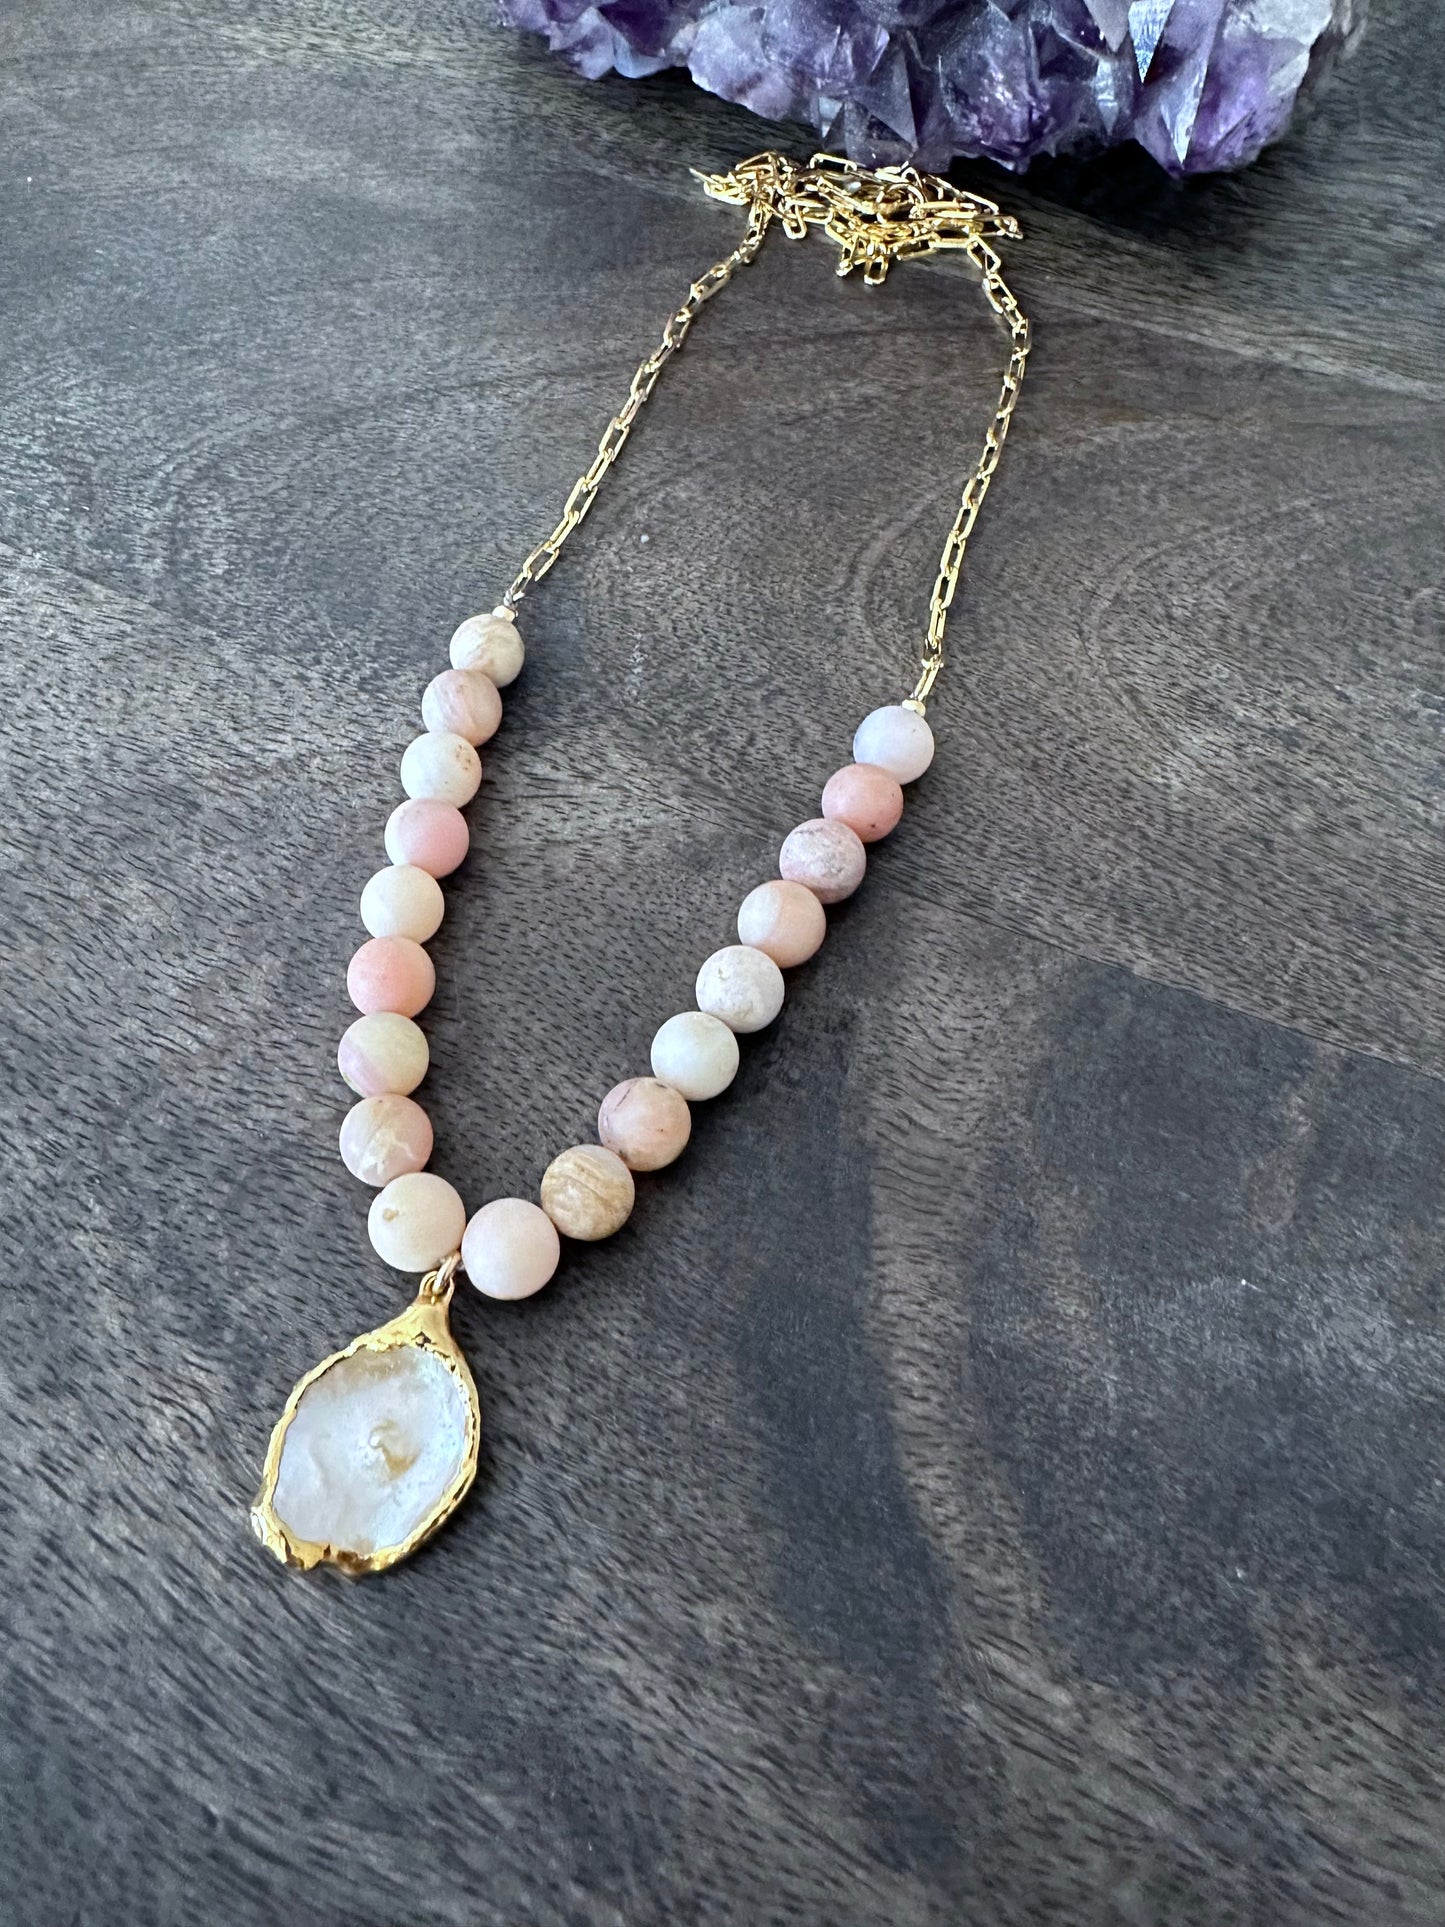 a necklace on a grey wooden background with pink beads and gold chain. theres is a white flat pearl as the center pendant